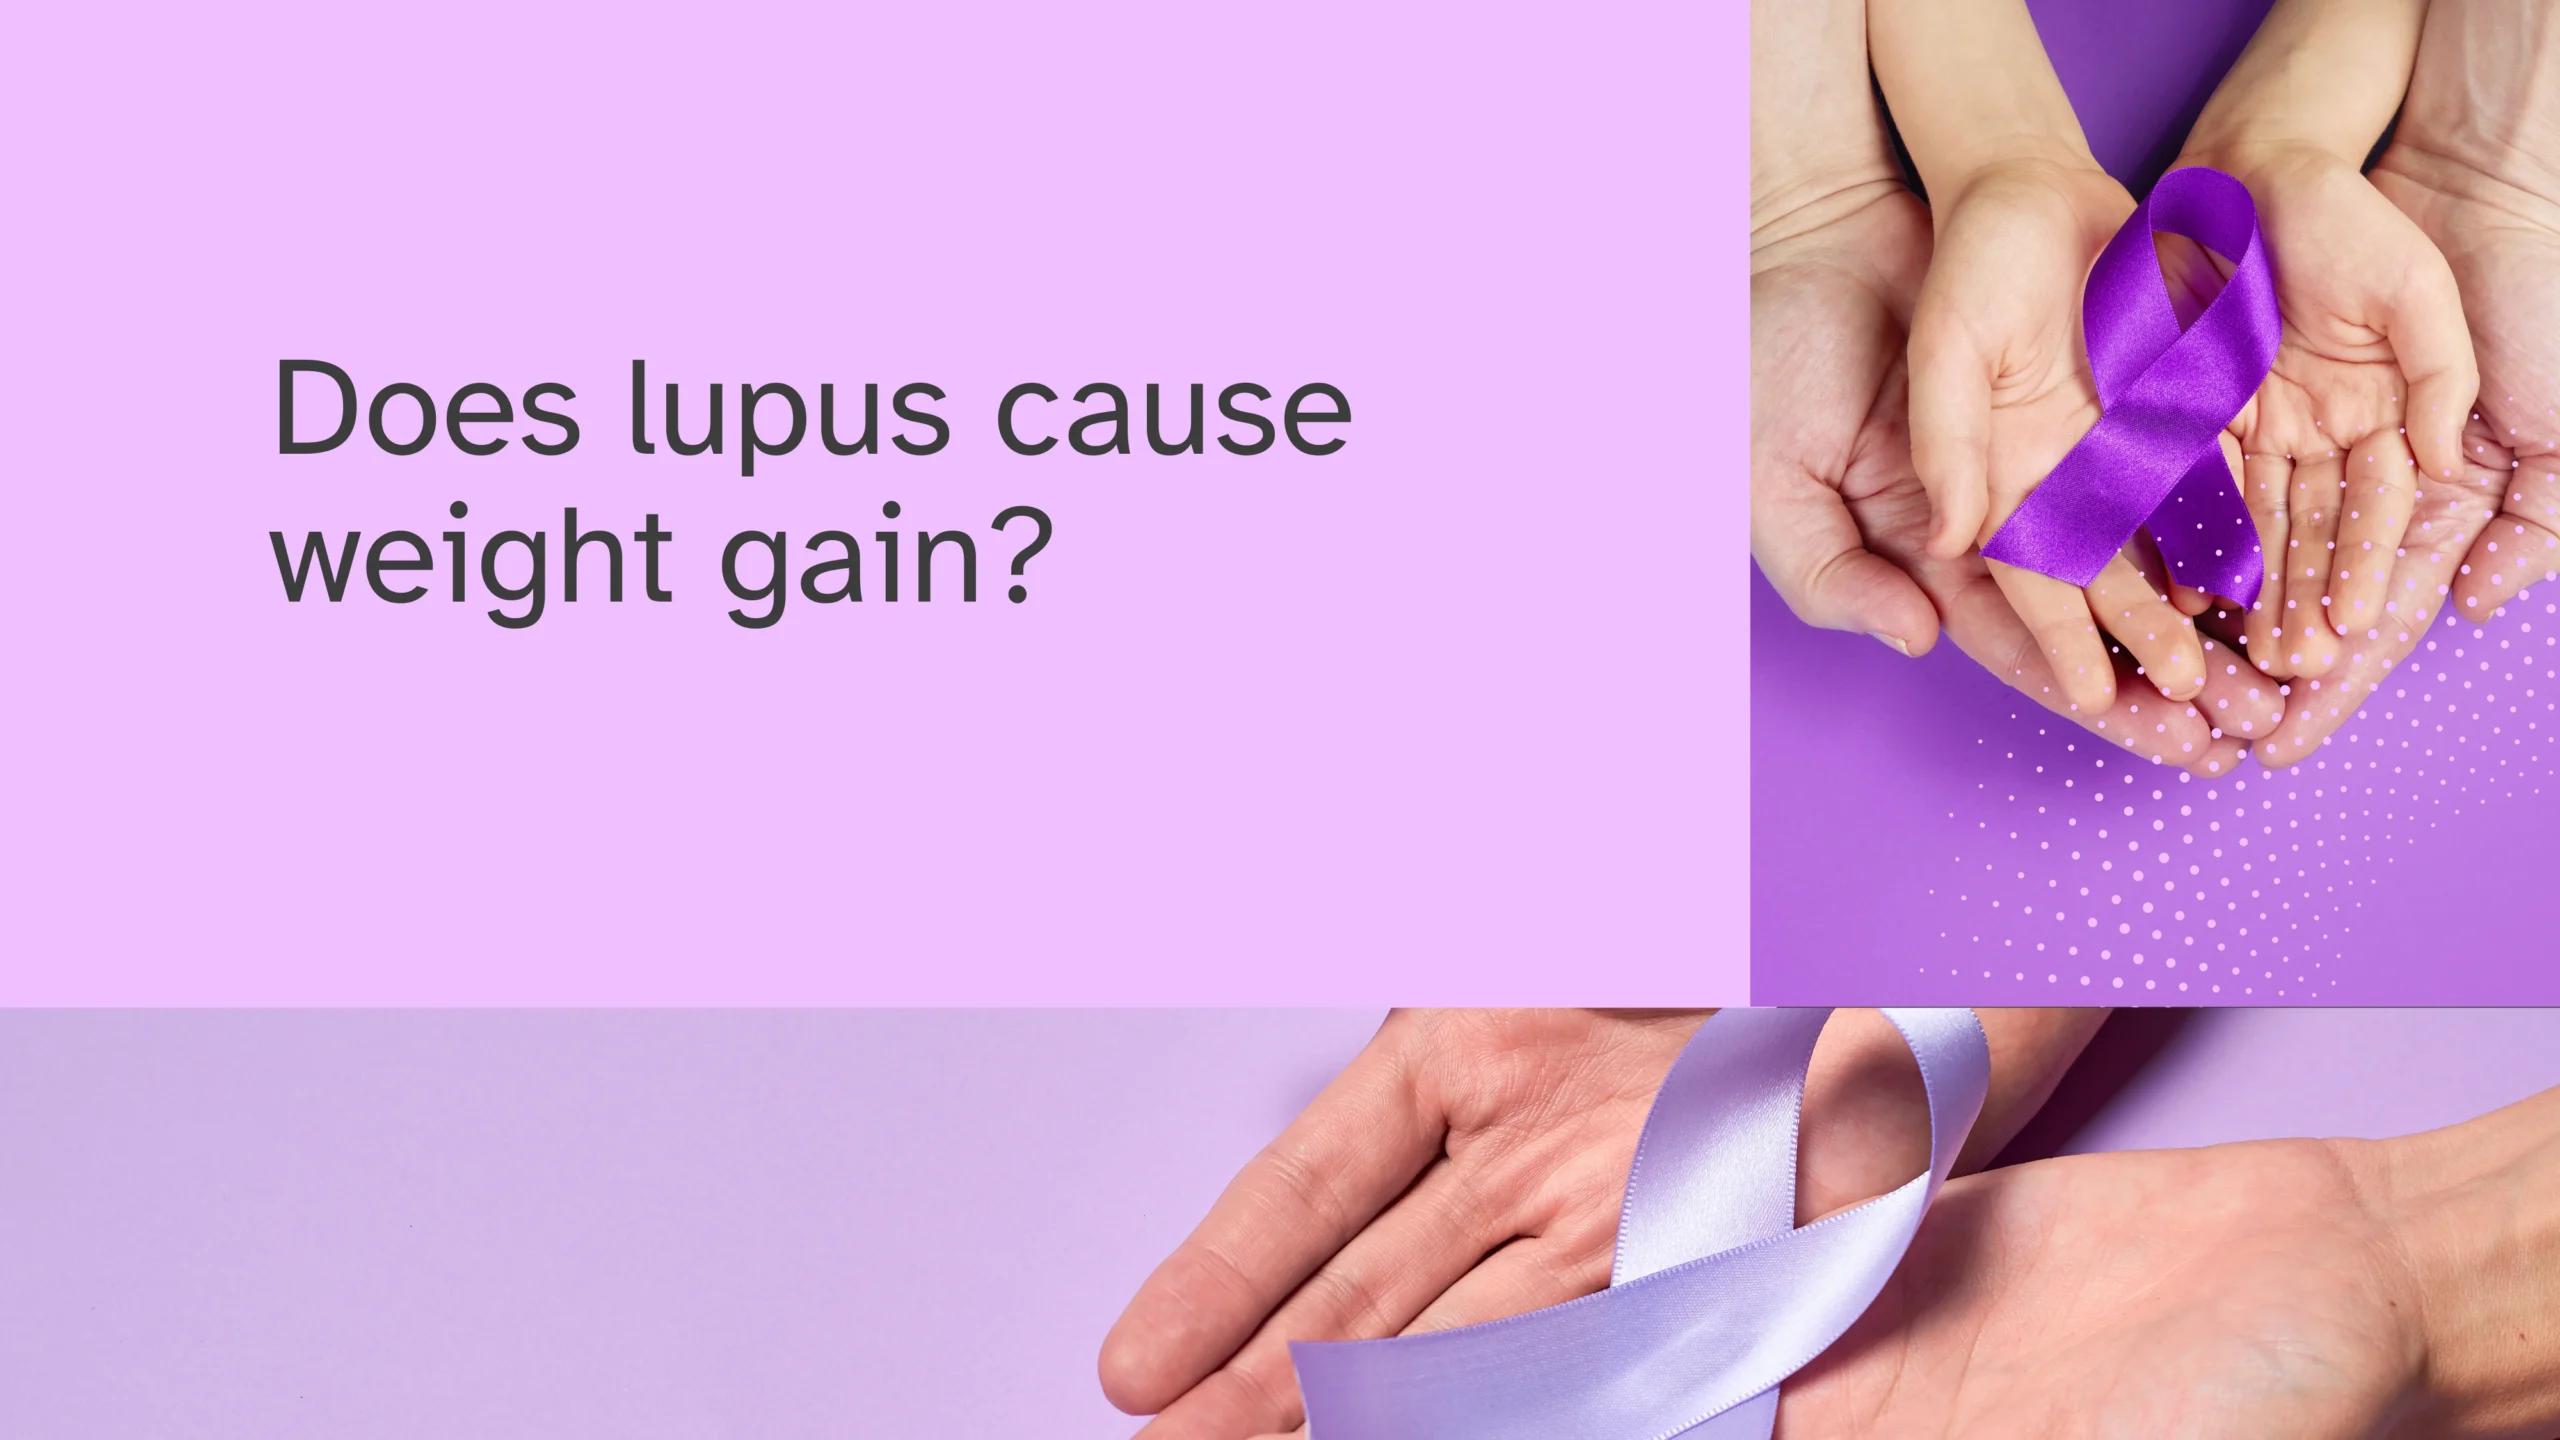 Does lupus cause weight gain